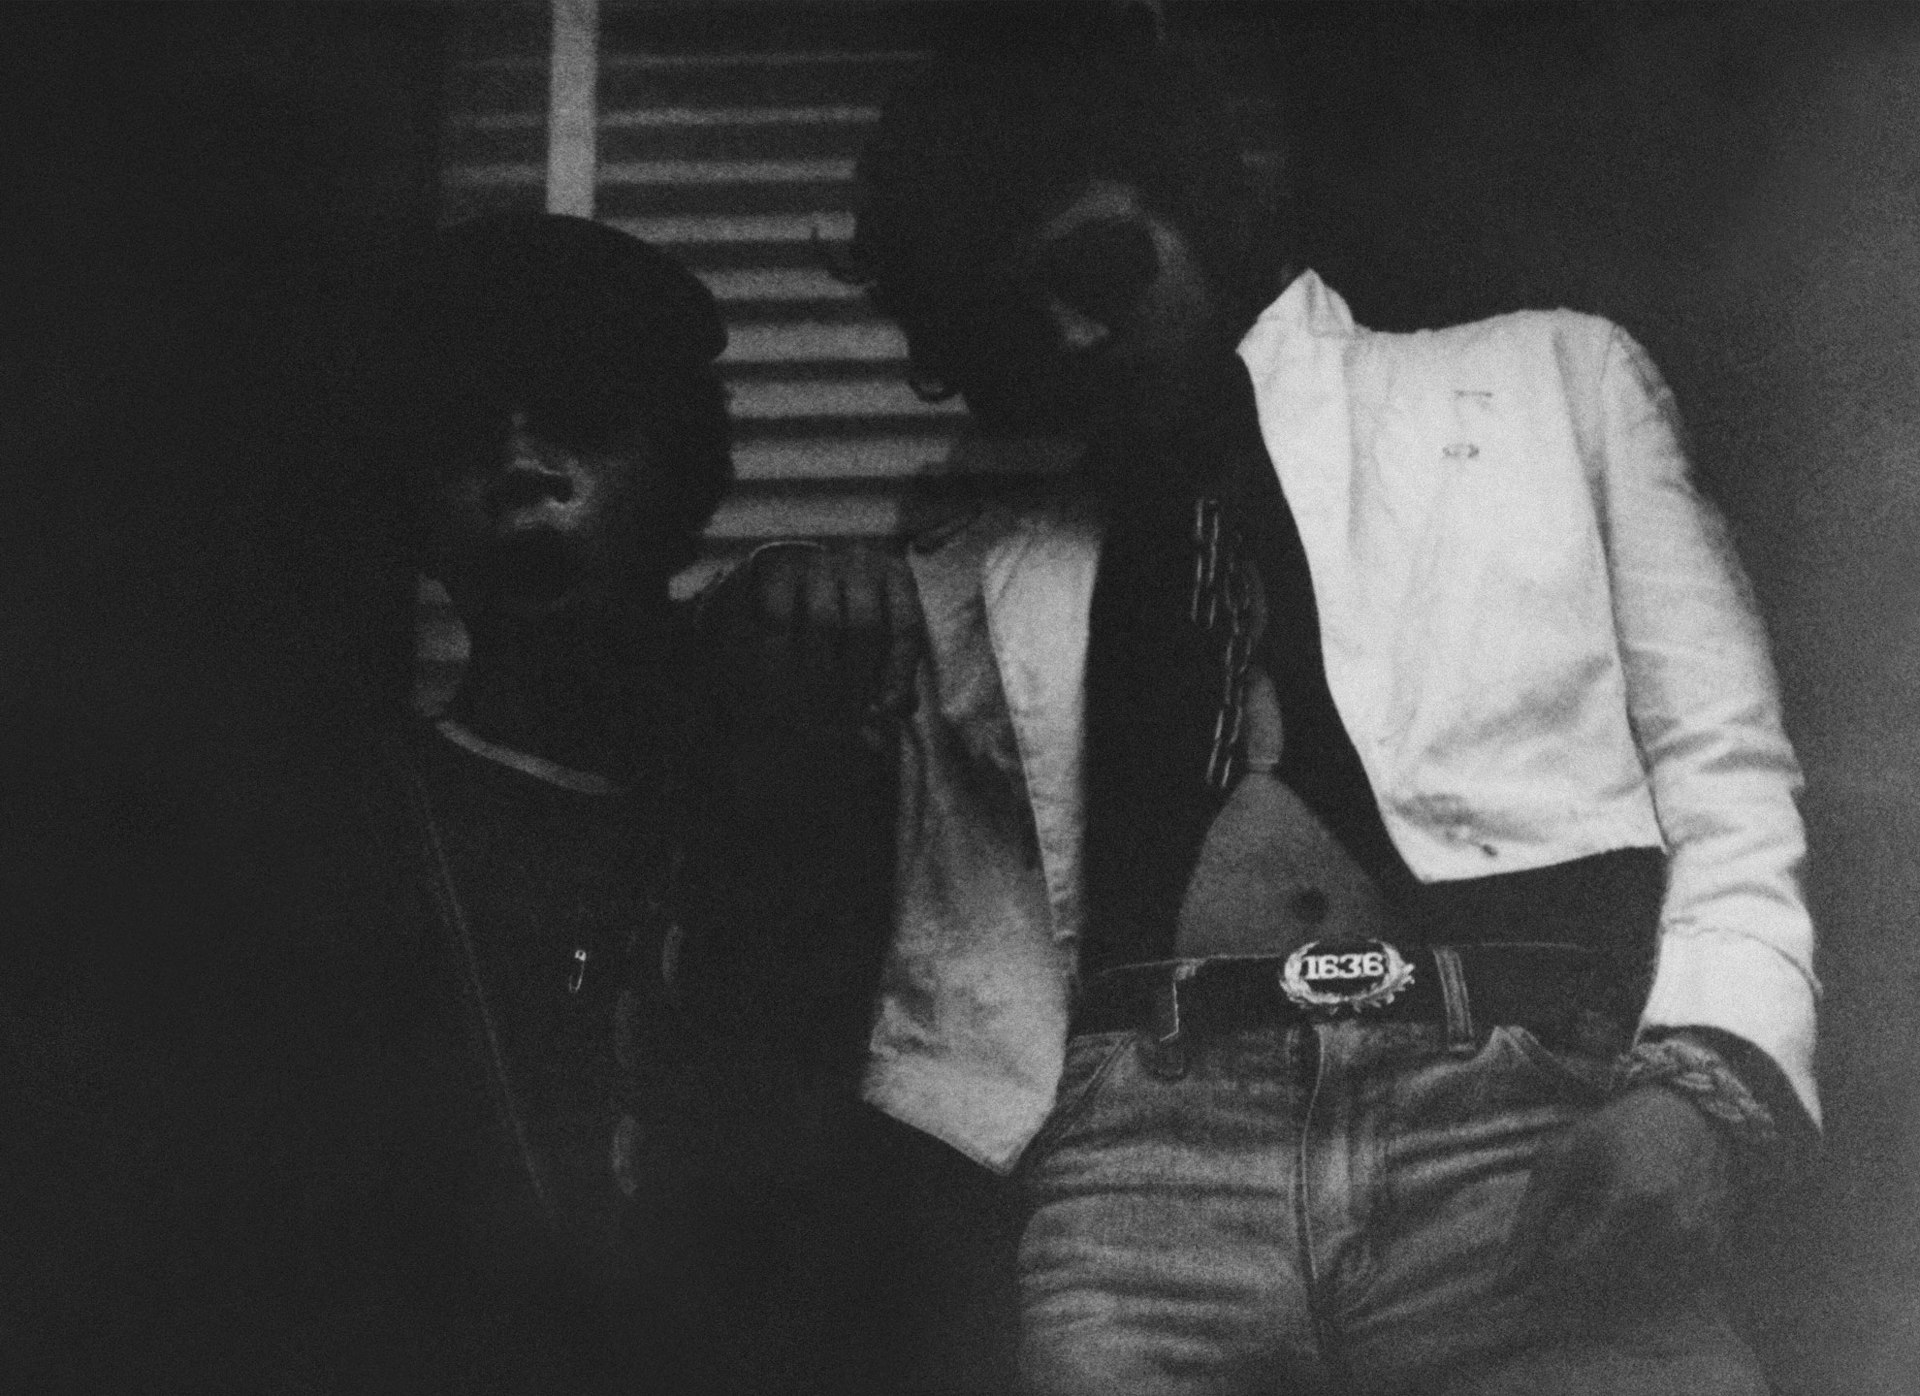 SAMO©… Jean-Michel Basquiat and Al Diaz, previously unpublished - one of only a few known images of the infamous duo together. Courtesy of House of Roulx